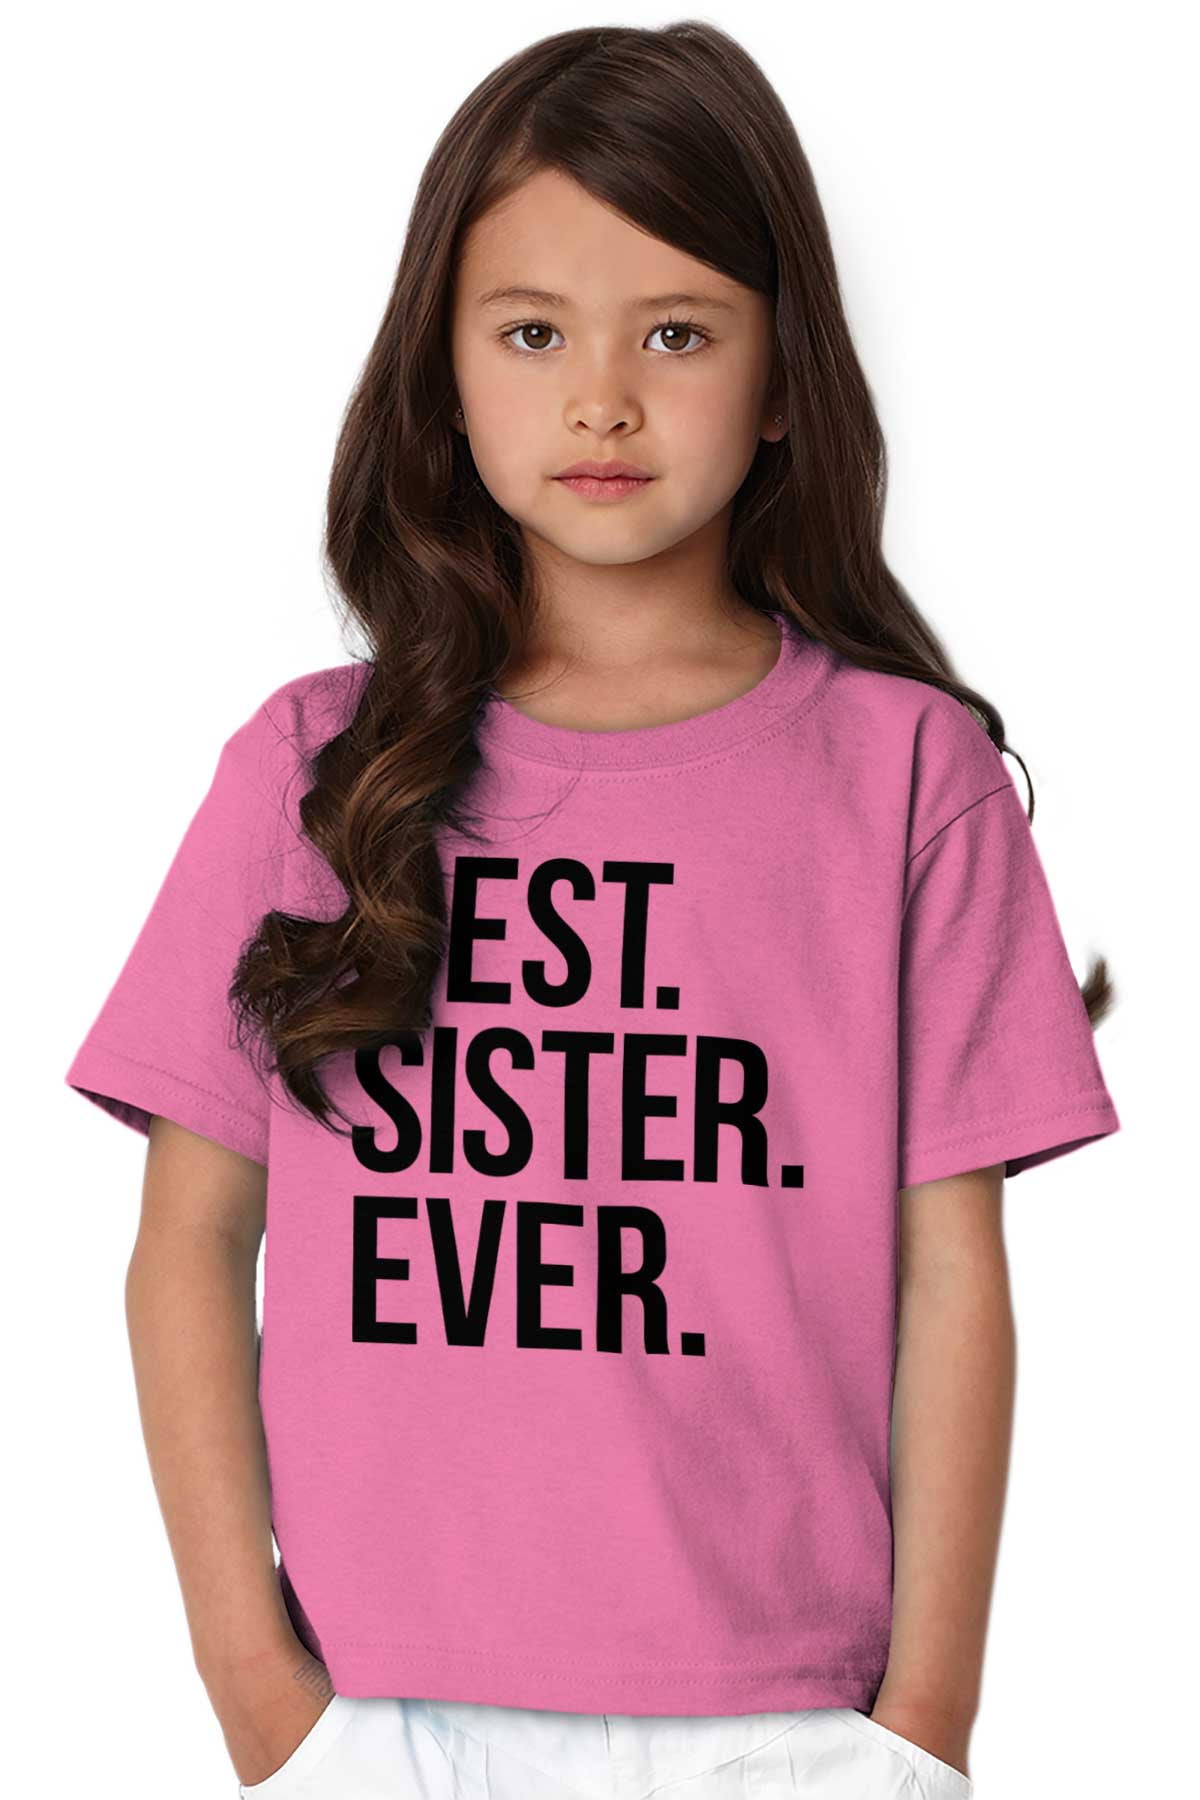 Best Relative Ever Girls Youth T-Shirts Tees Tshirts Best Sister Ever ...